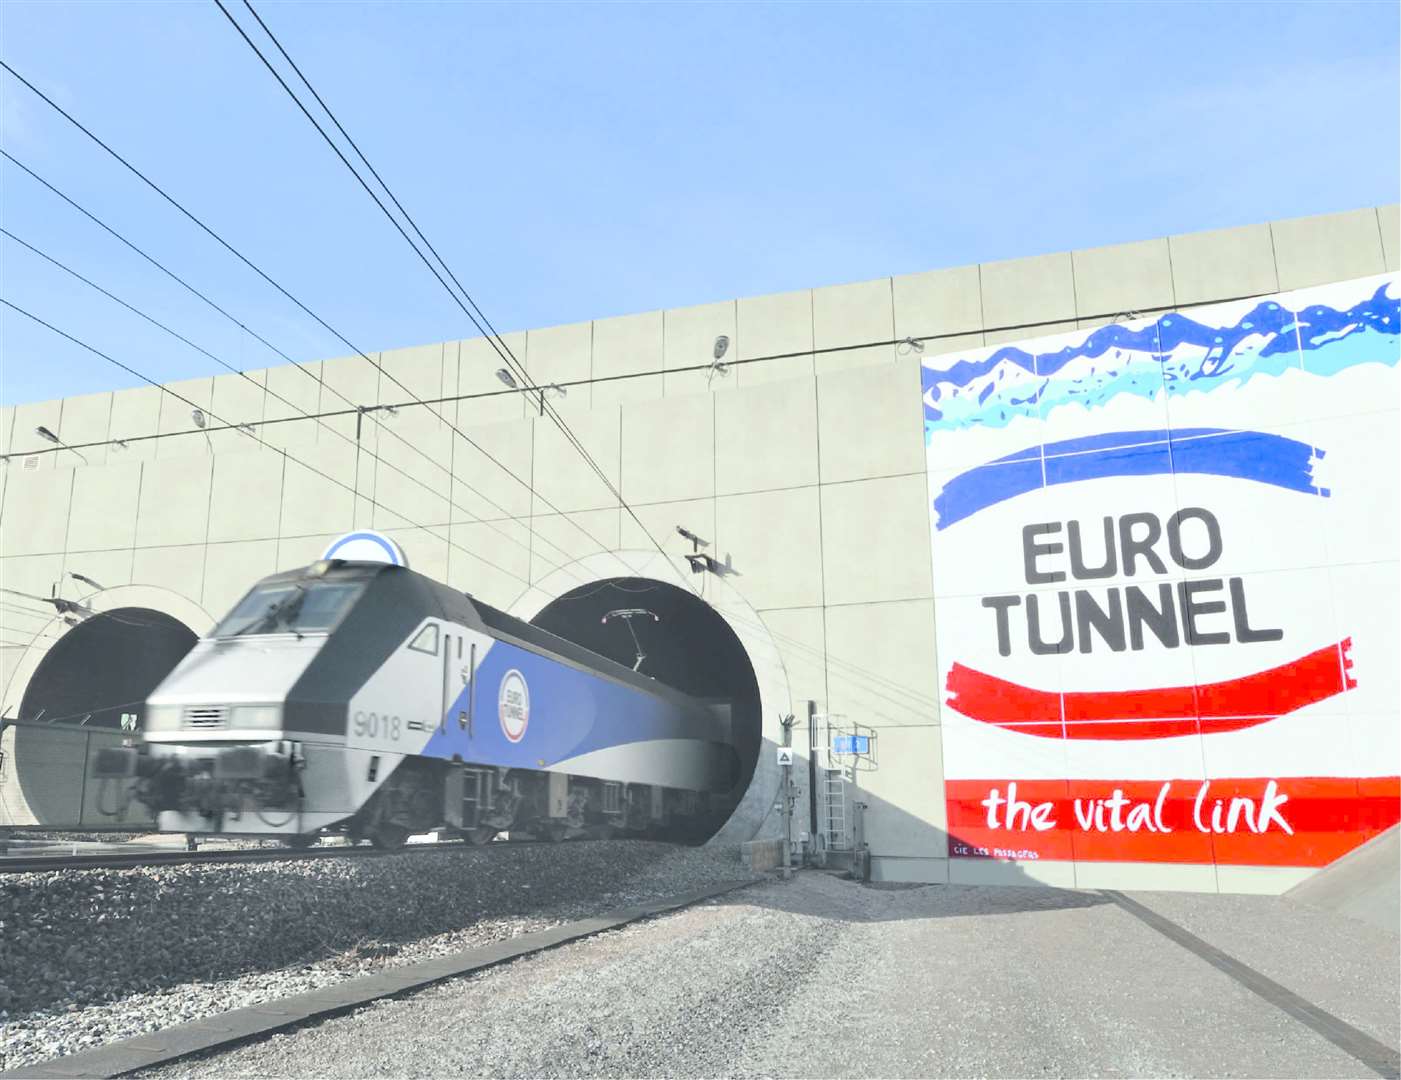 Eurotunnel saw an expected collapse in passenger numbers during April as both the UK and France introduced lockdown measures